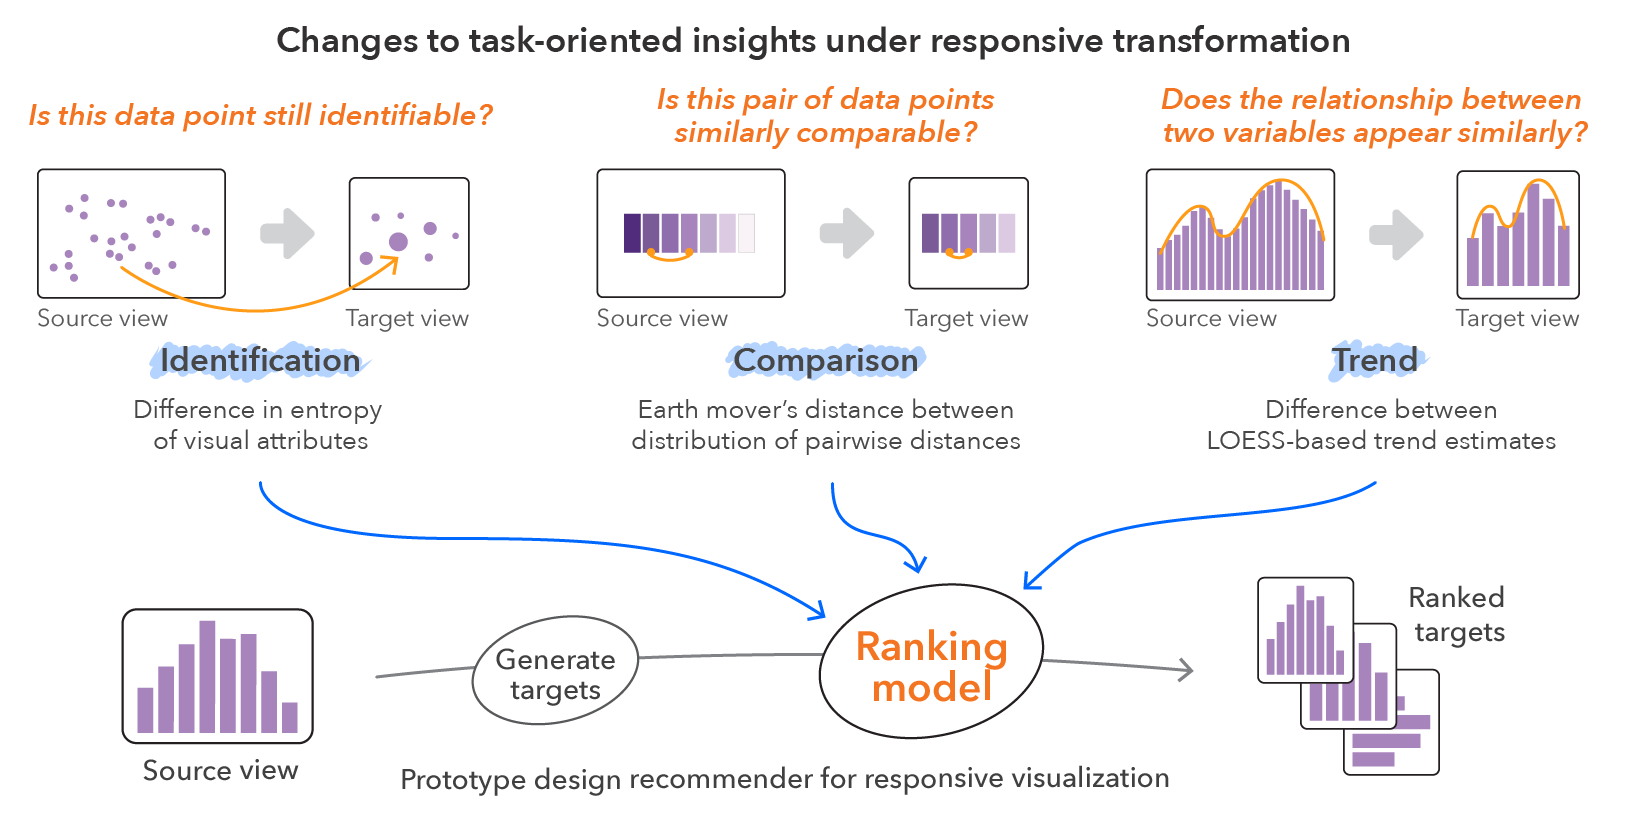 Changes to task-oriented insights under responsive transformations. Identification: is this data point still identifiable? Approximated using difference in entropy of visual attributes. Comparison: Is this pair of data points similarly comparable? Approximated by Earth Mover's Distance between distributions of pairwise distances. Trend: Does this relationship between two variables appear similarly? Approximated by difference between LOESS-based trend estimates. Under a pipeline from a source view, candidate generation, ranking model to ranked output targets, these three approximations are applied to the ranking model part.